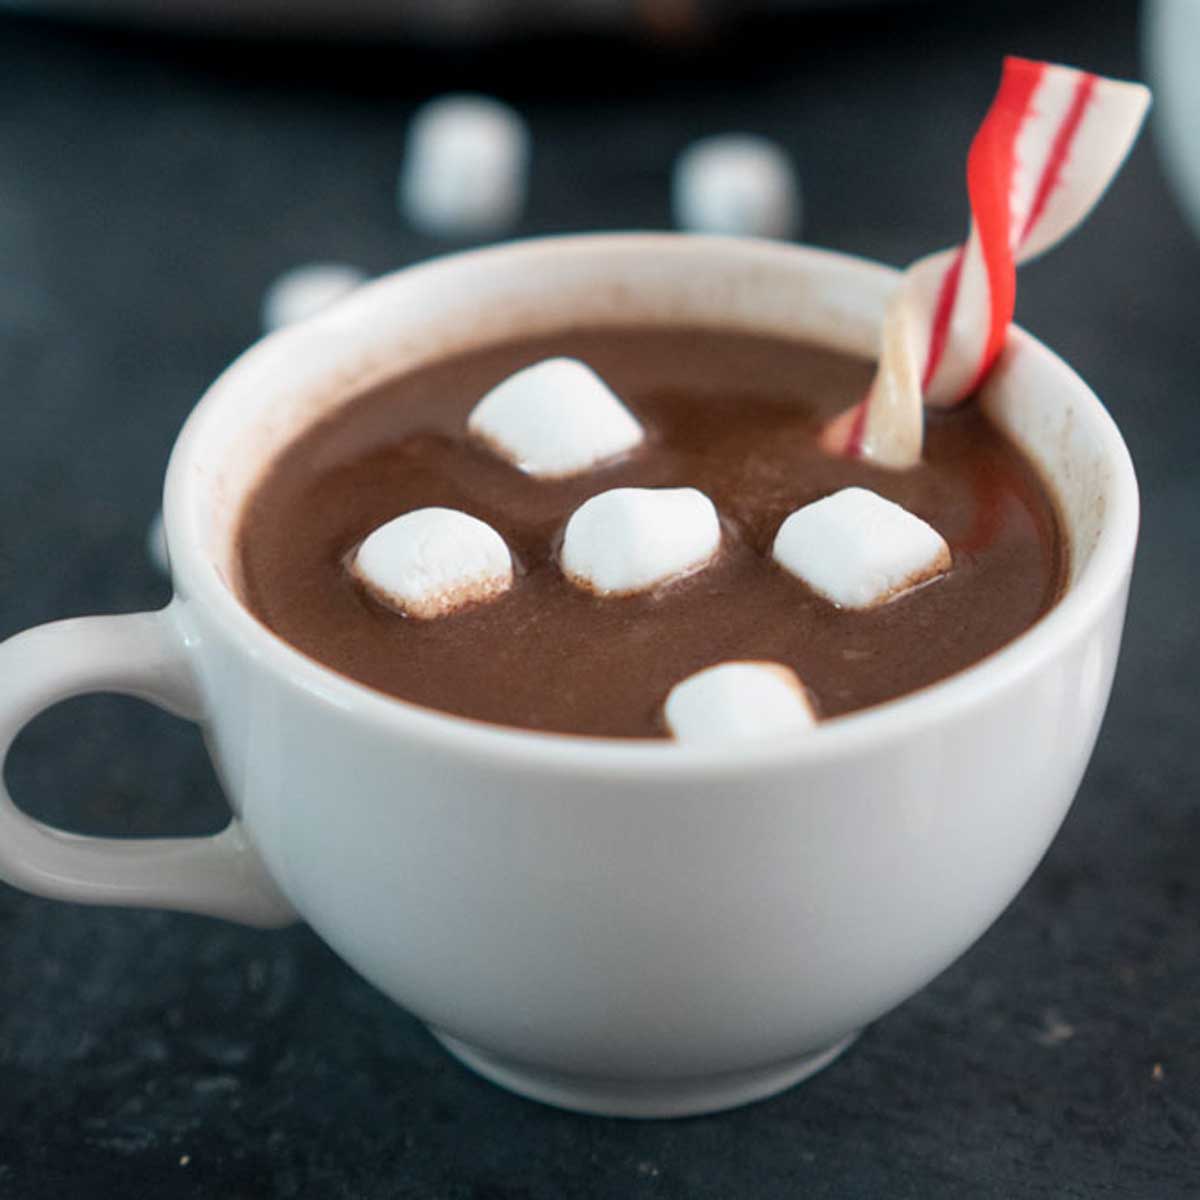 Slow Cooker Hot Chocolate Recipe with Confetti - Bowl Me Over